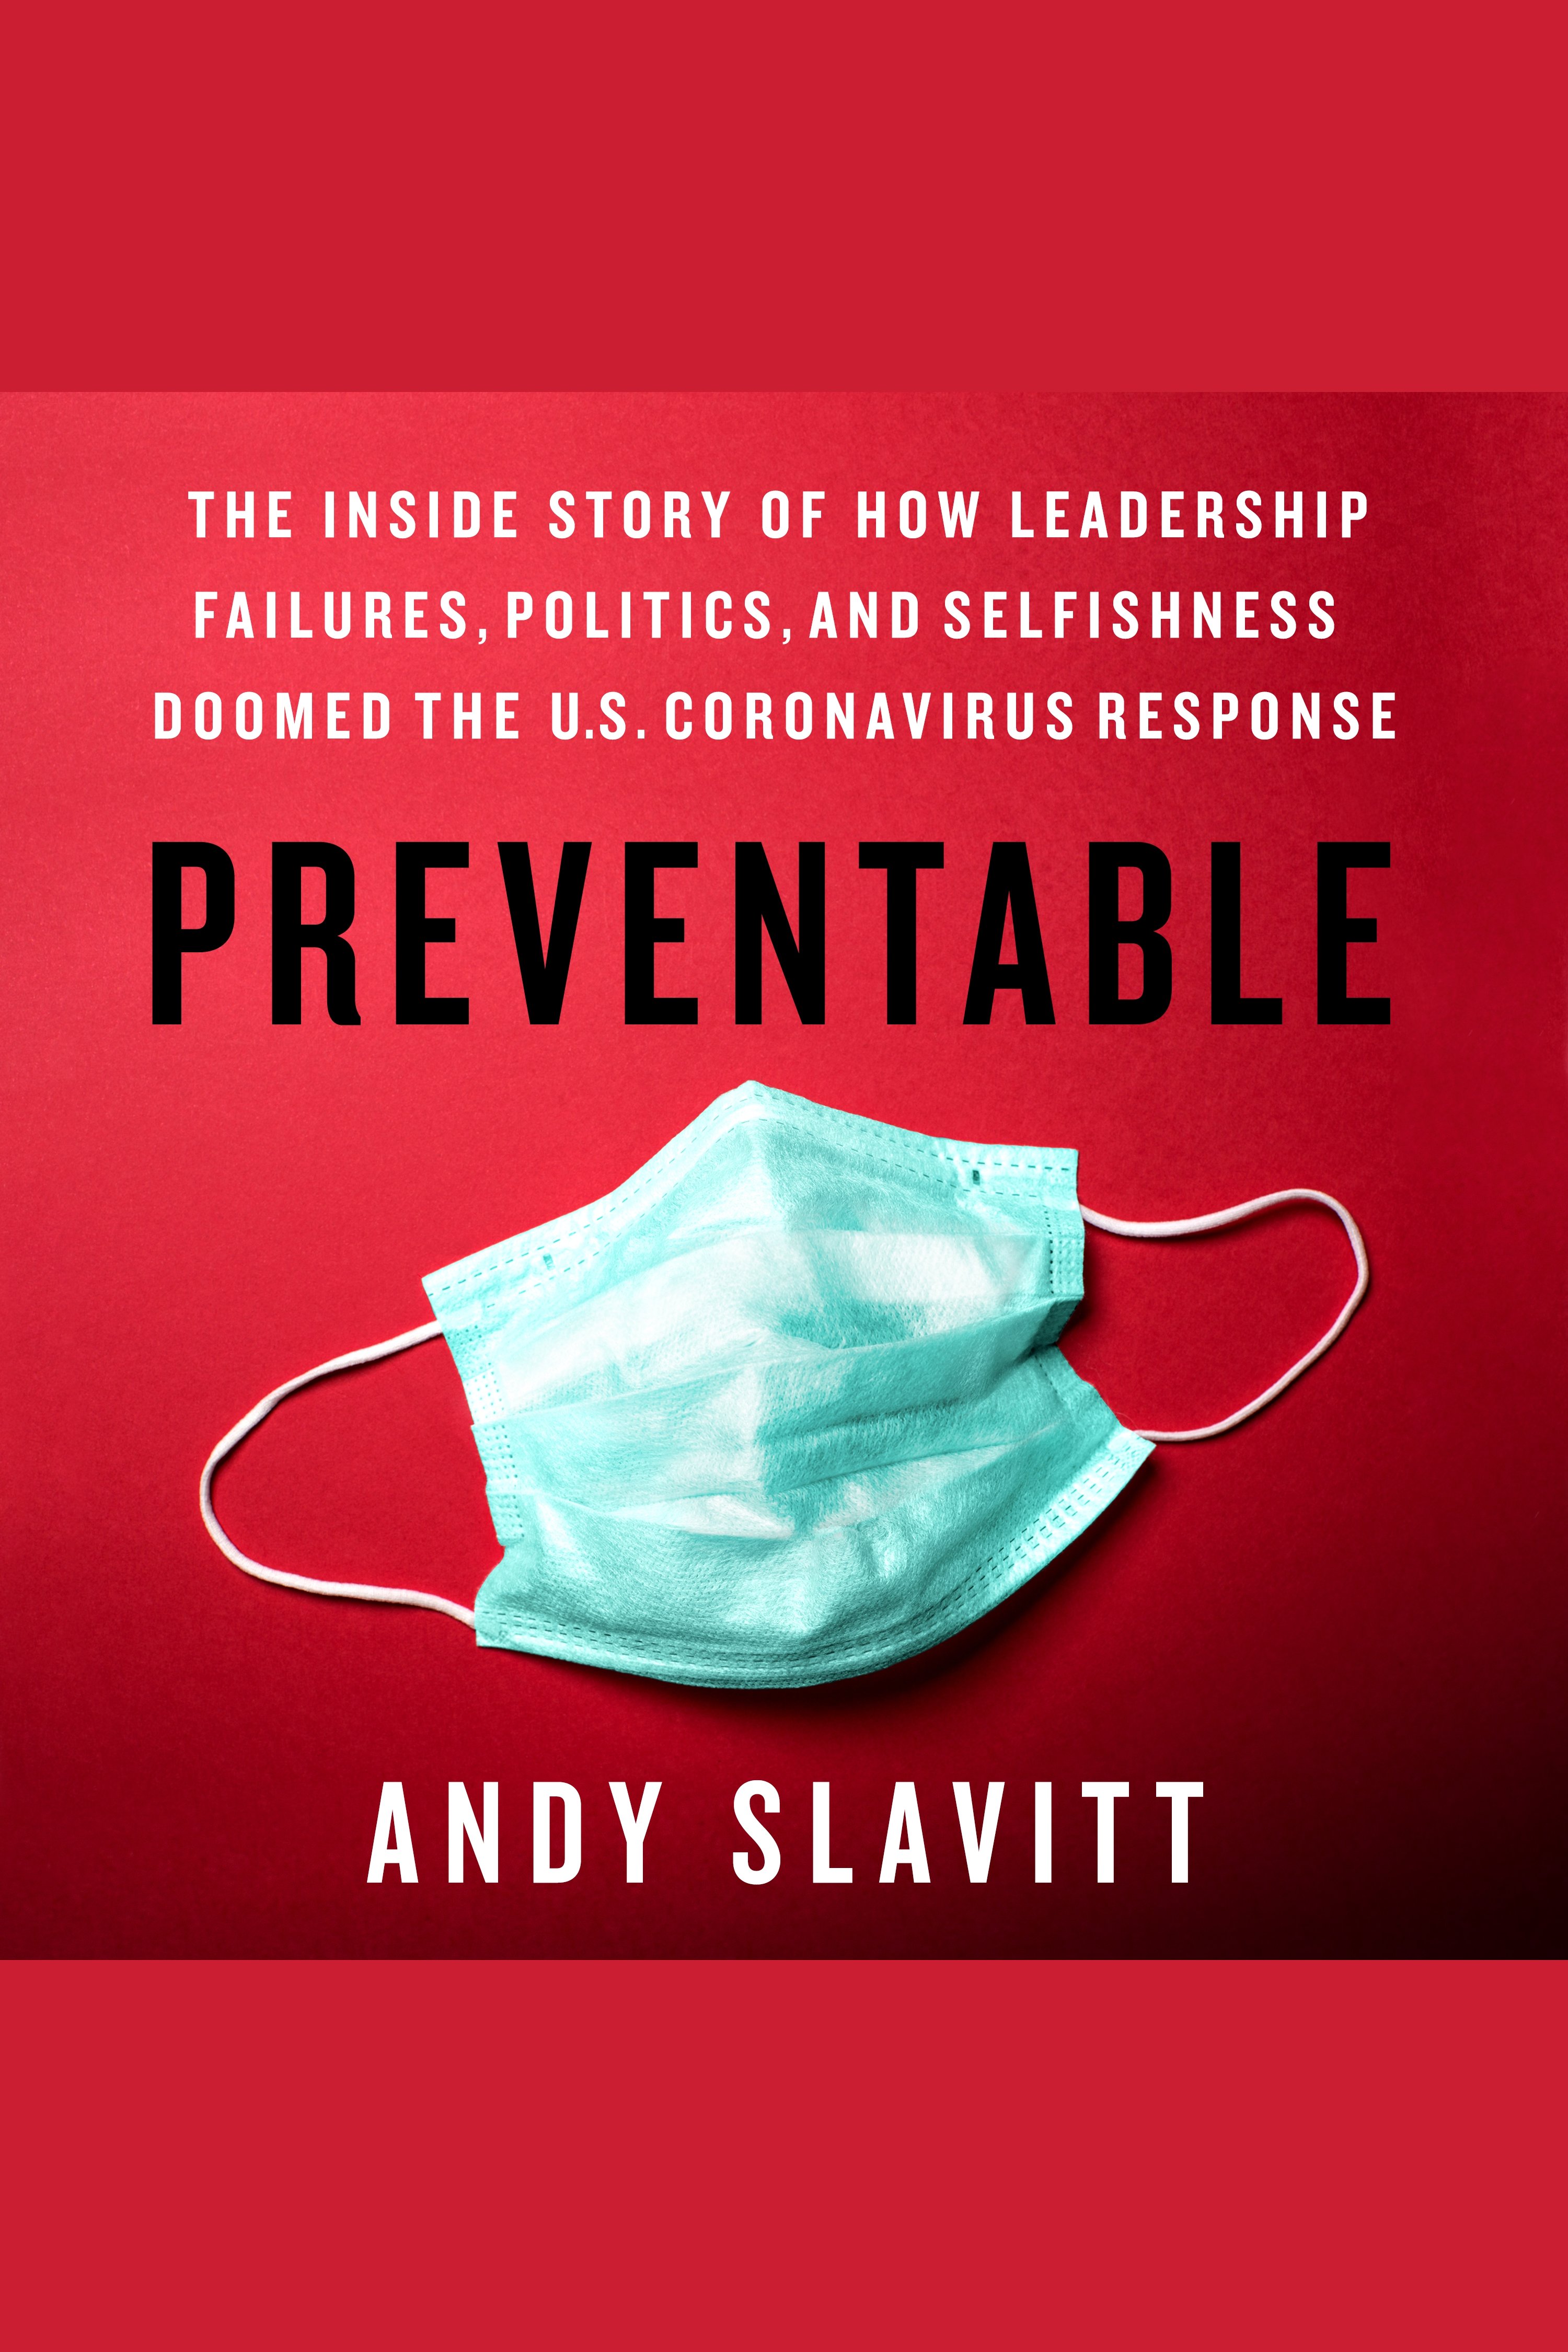 Umschlagbild für Preventable [electronic resource] : The Inside Story of How Leadership Failures, Politics, and Selfishness Doomed the U.S. Coronavirus Response